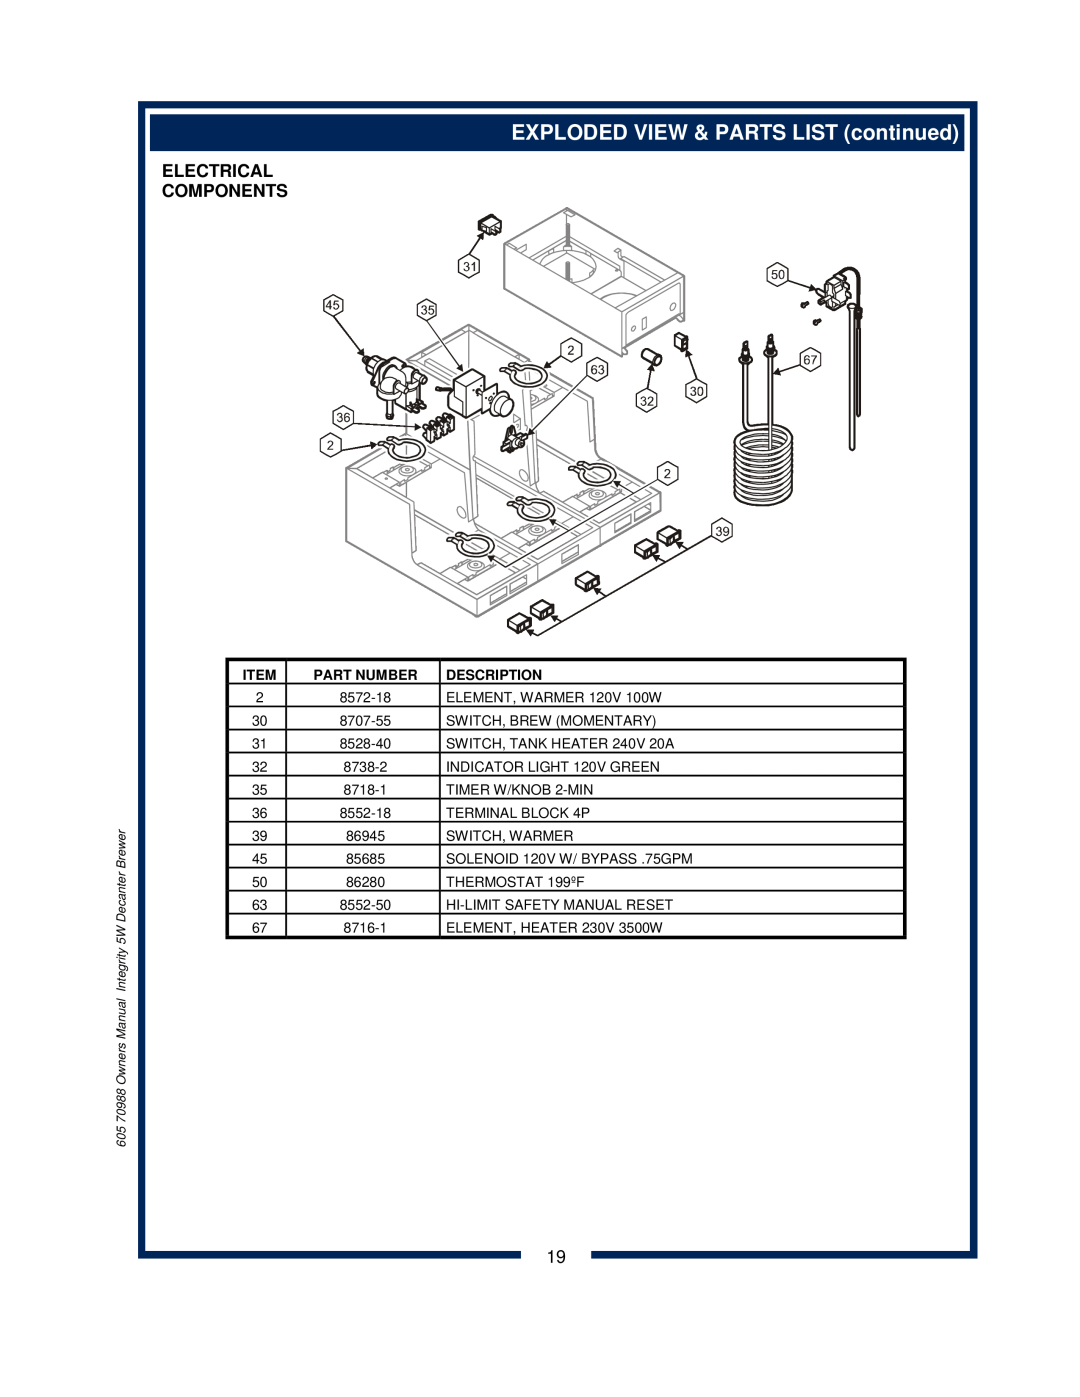 Bloomfield 8752 owner manual EXPLODED VIEW & PARTS LIST continued, Electrical Components, Part Number, Description 